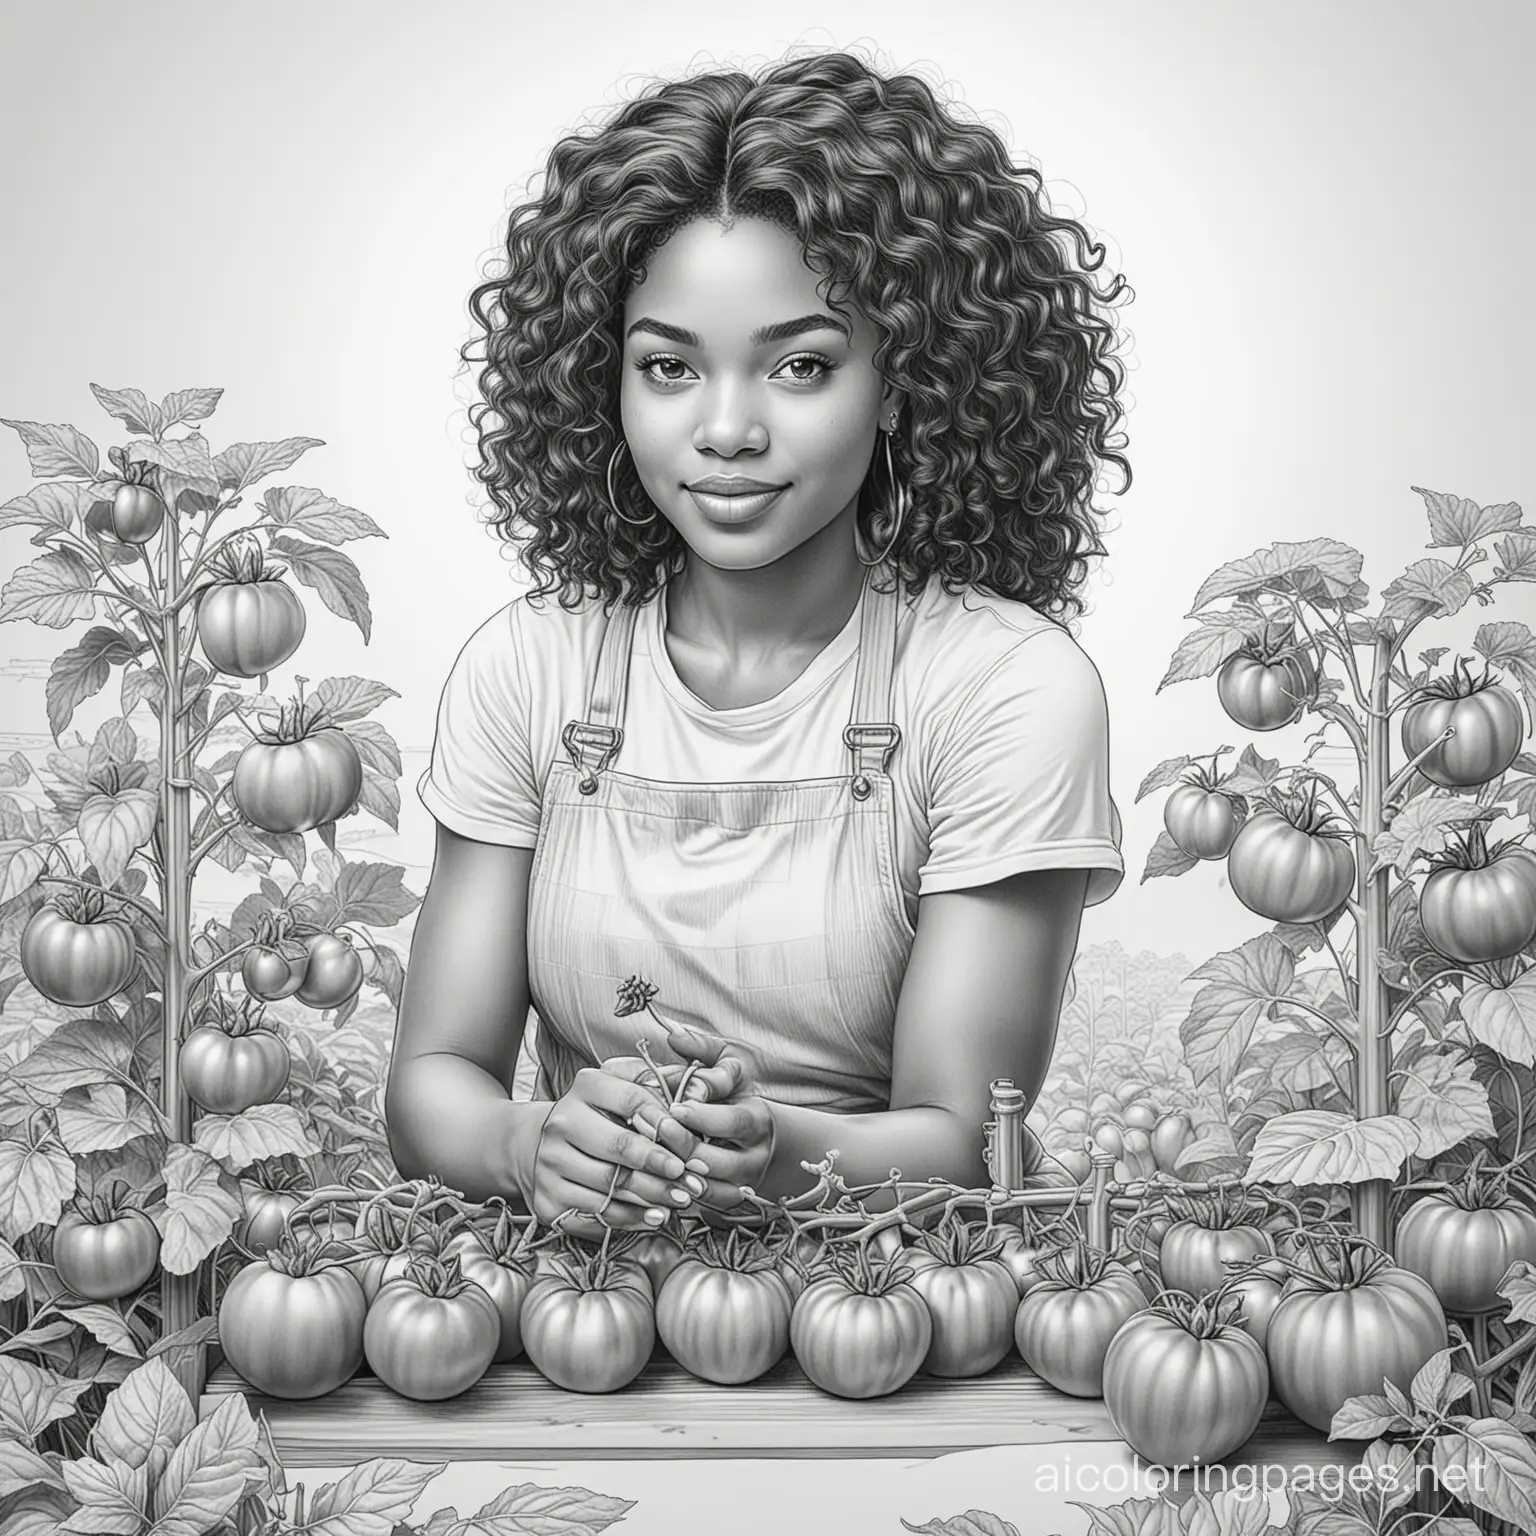 African American woman growing tomatoes, Coloring Page, black and white, line art, white background, Simplicity, Ample White Space. The background of the coloring page is plain white to make it easy for young children to color within the lines. The outlines of all the subjects are easy to distinguish, making it simple for kids to color without too much difficulty